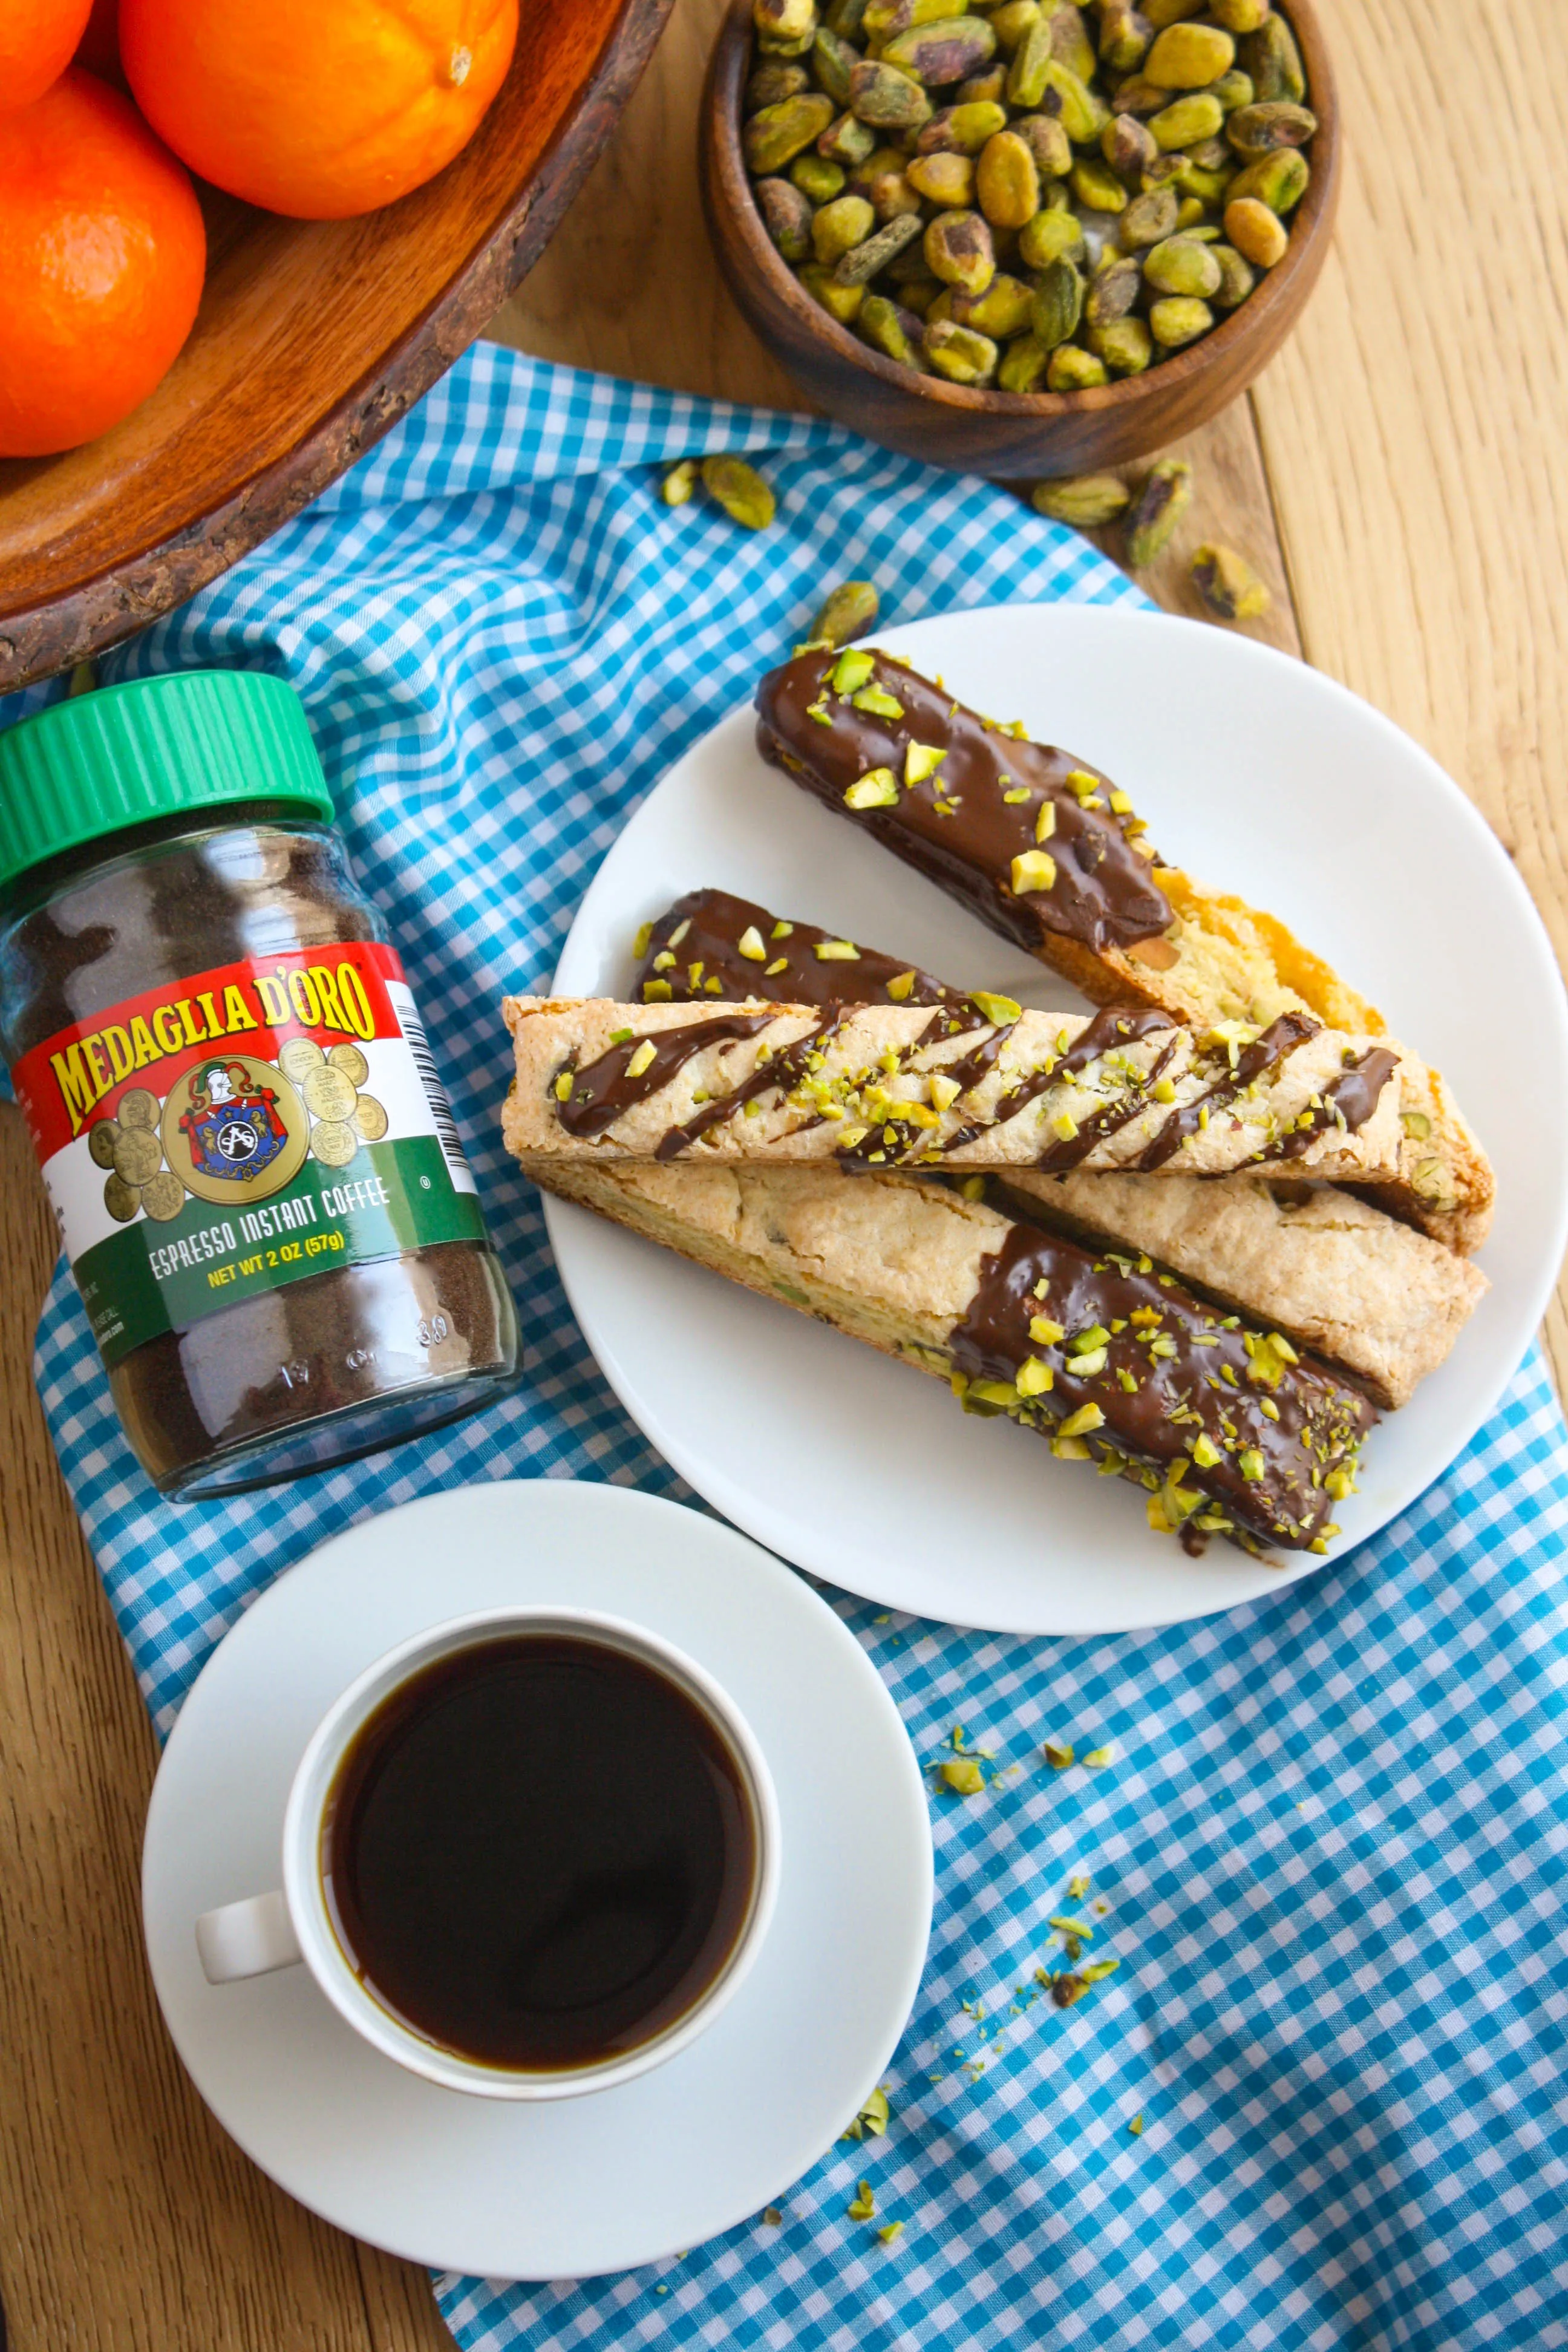 Chocolate-Espresso Dipped Orange and Pistachio Biscotti cookies are an Italian treat you'll love. These dessert cookies are fabulous anytime!